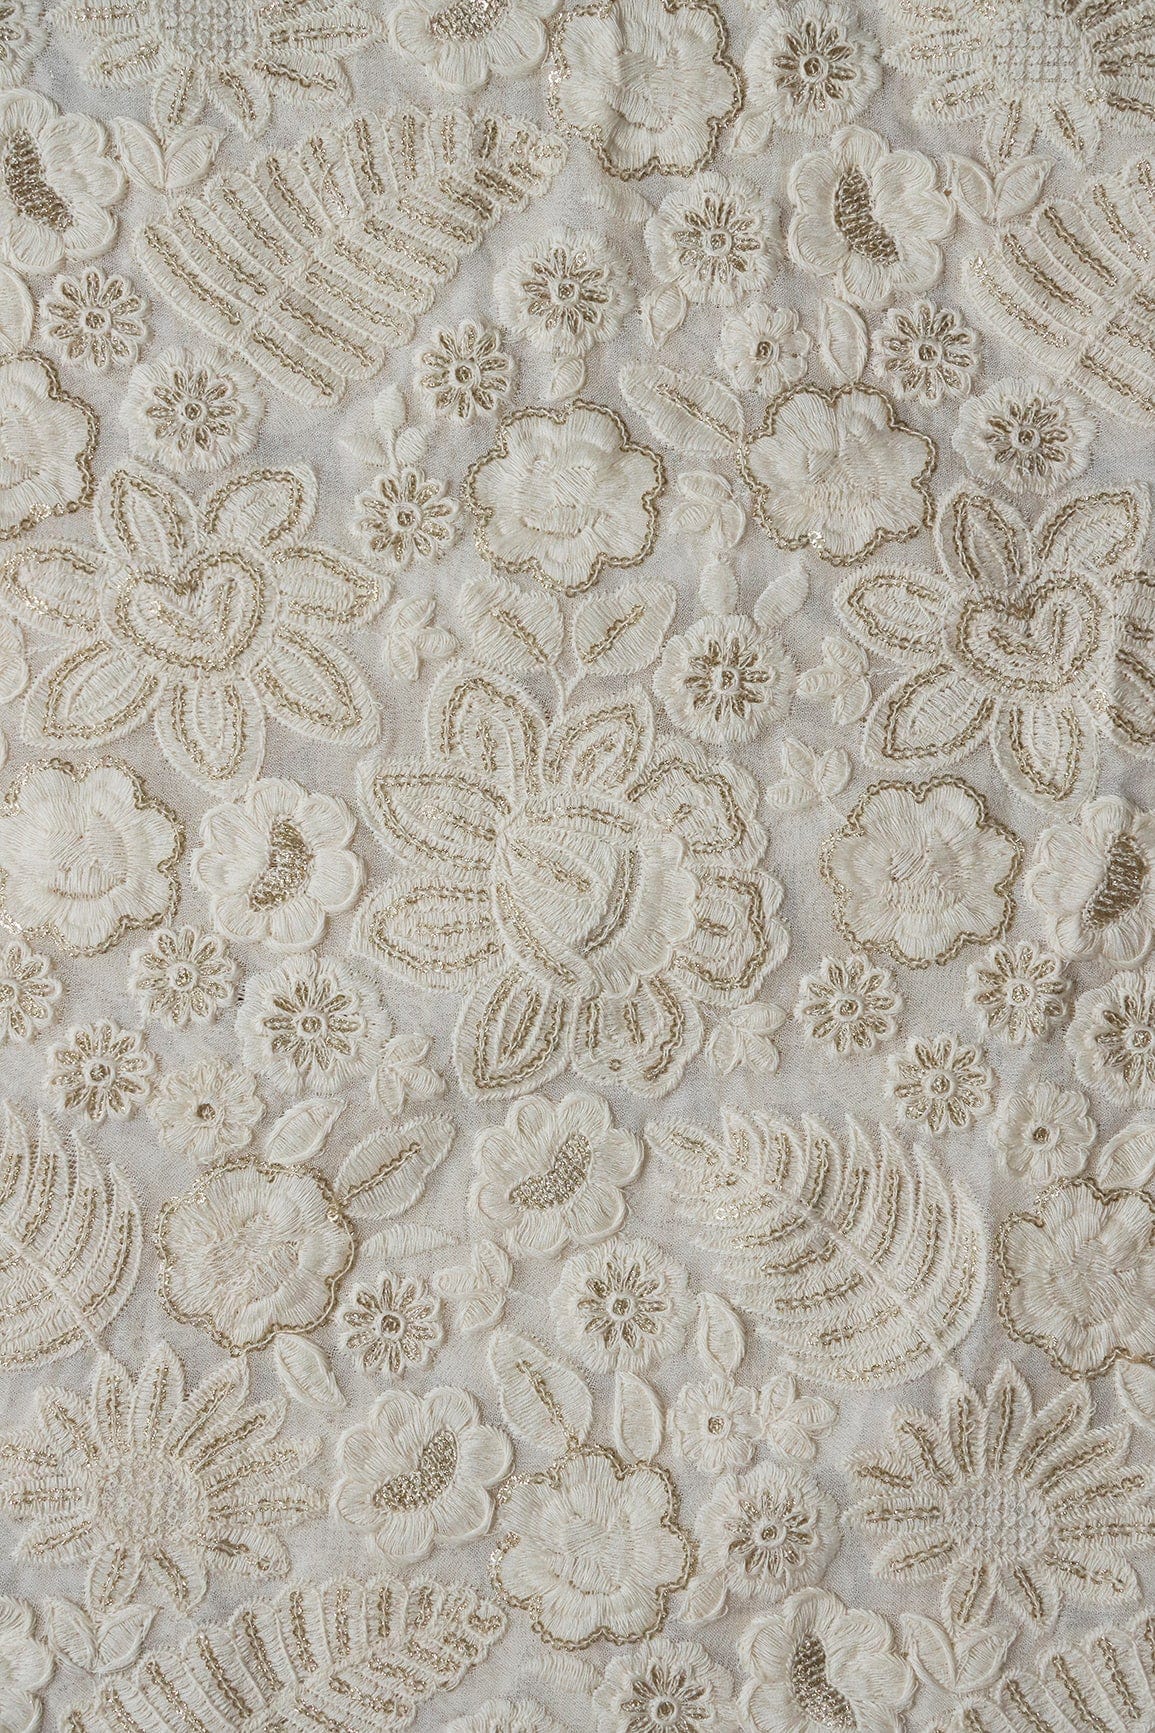 doeraa Embroidery Fabrics White Thread With Sequins Heavy Floral Embroidery On White Dyeable Viscose Georgette Fabric